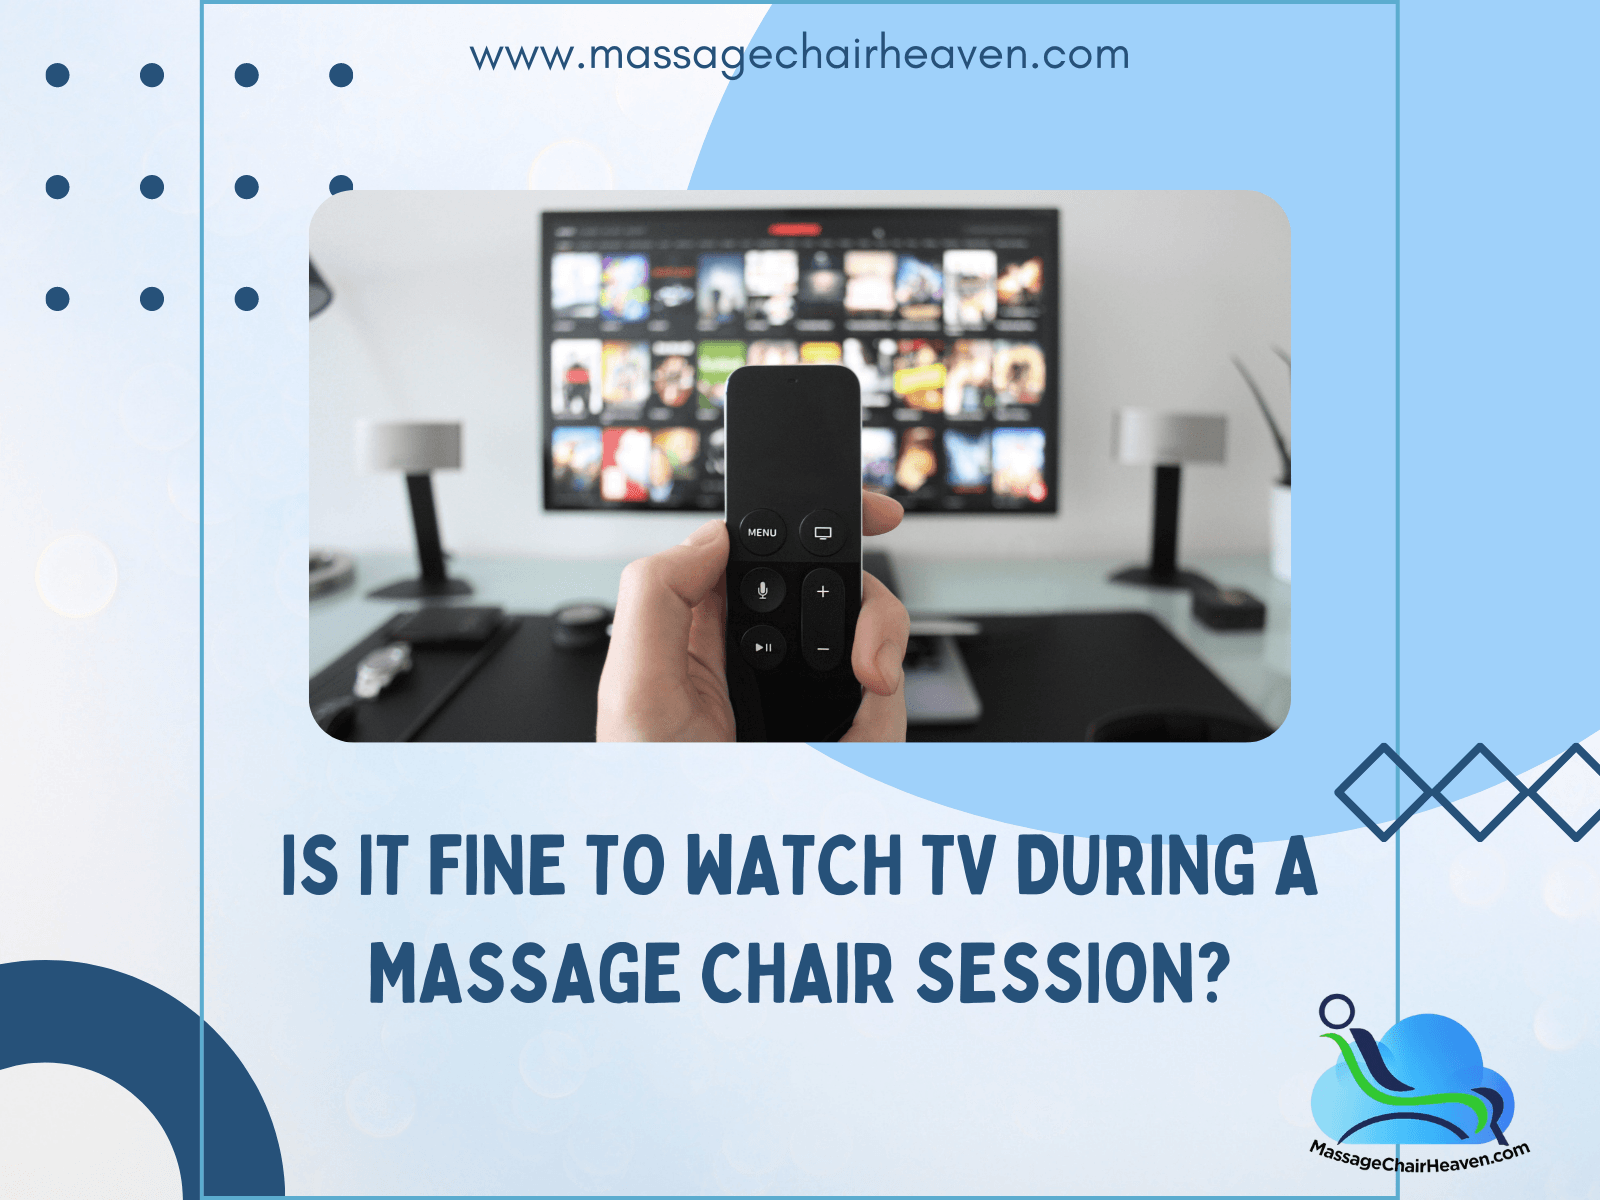 Is It Fine To Watch TV During A Massage Chair Session? - Massage Chair Heaven